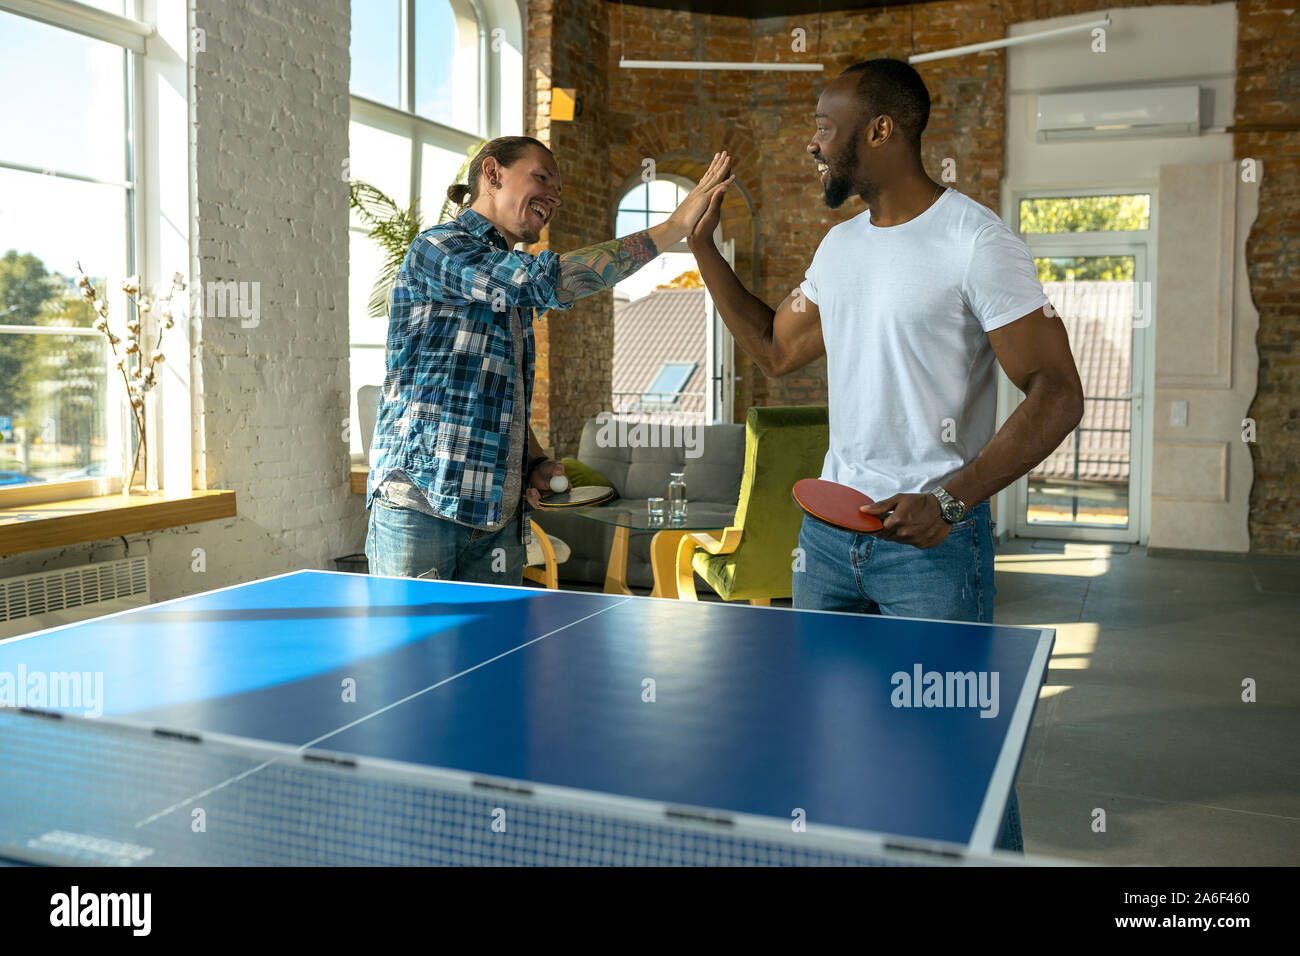 Young men playing table tennis in workplace, having fun. Friends in casual  clothes play ping pong together at sunny day. Concept of leisure activity,  sport, friendship, teambuilding, teamwork Stock Photo - Alamy